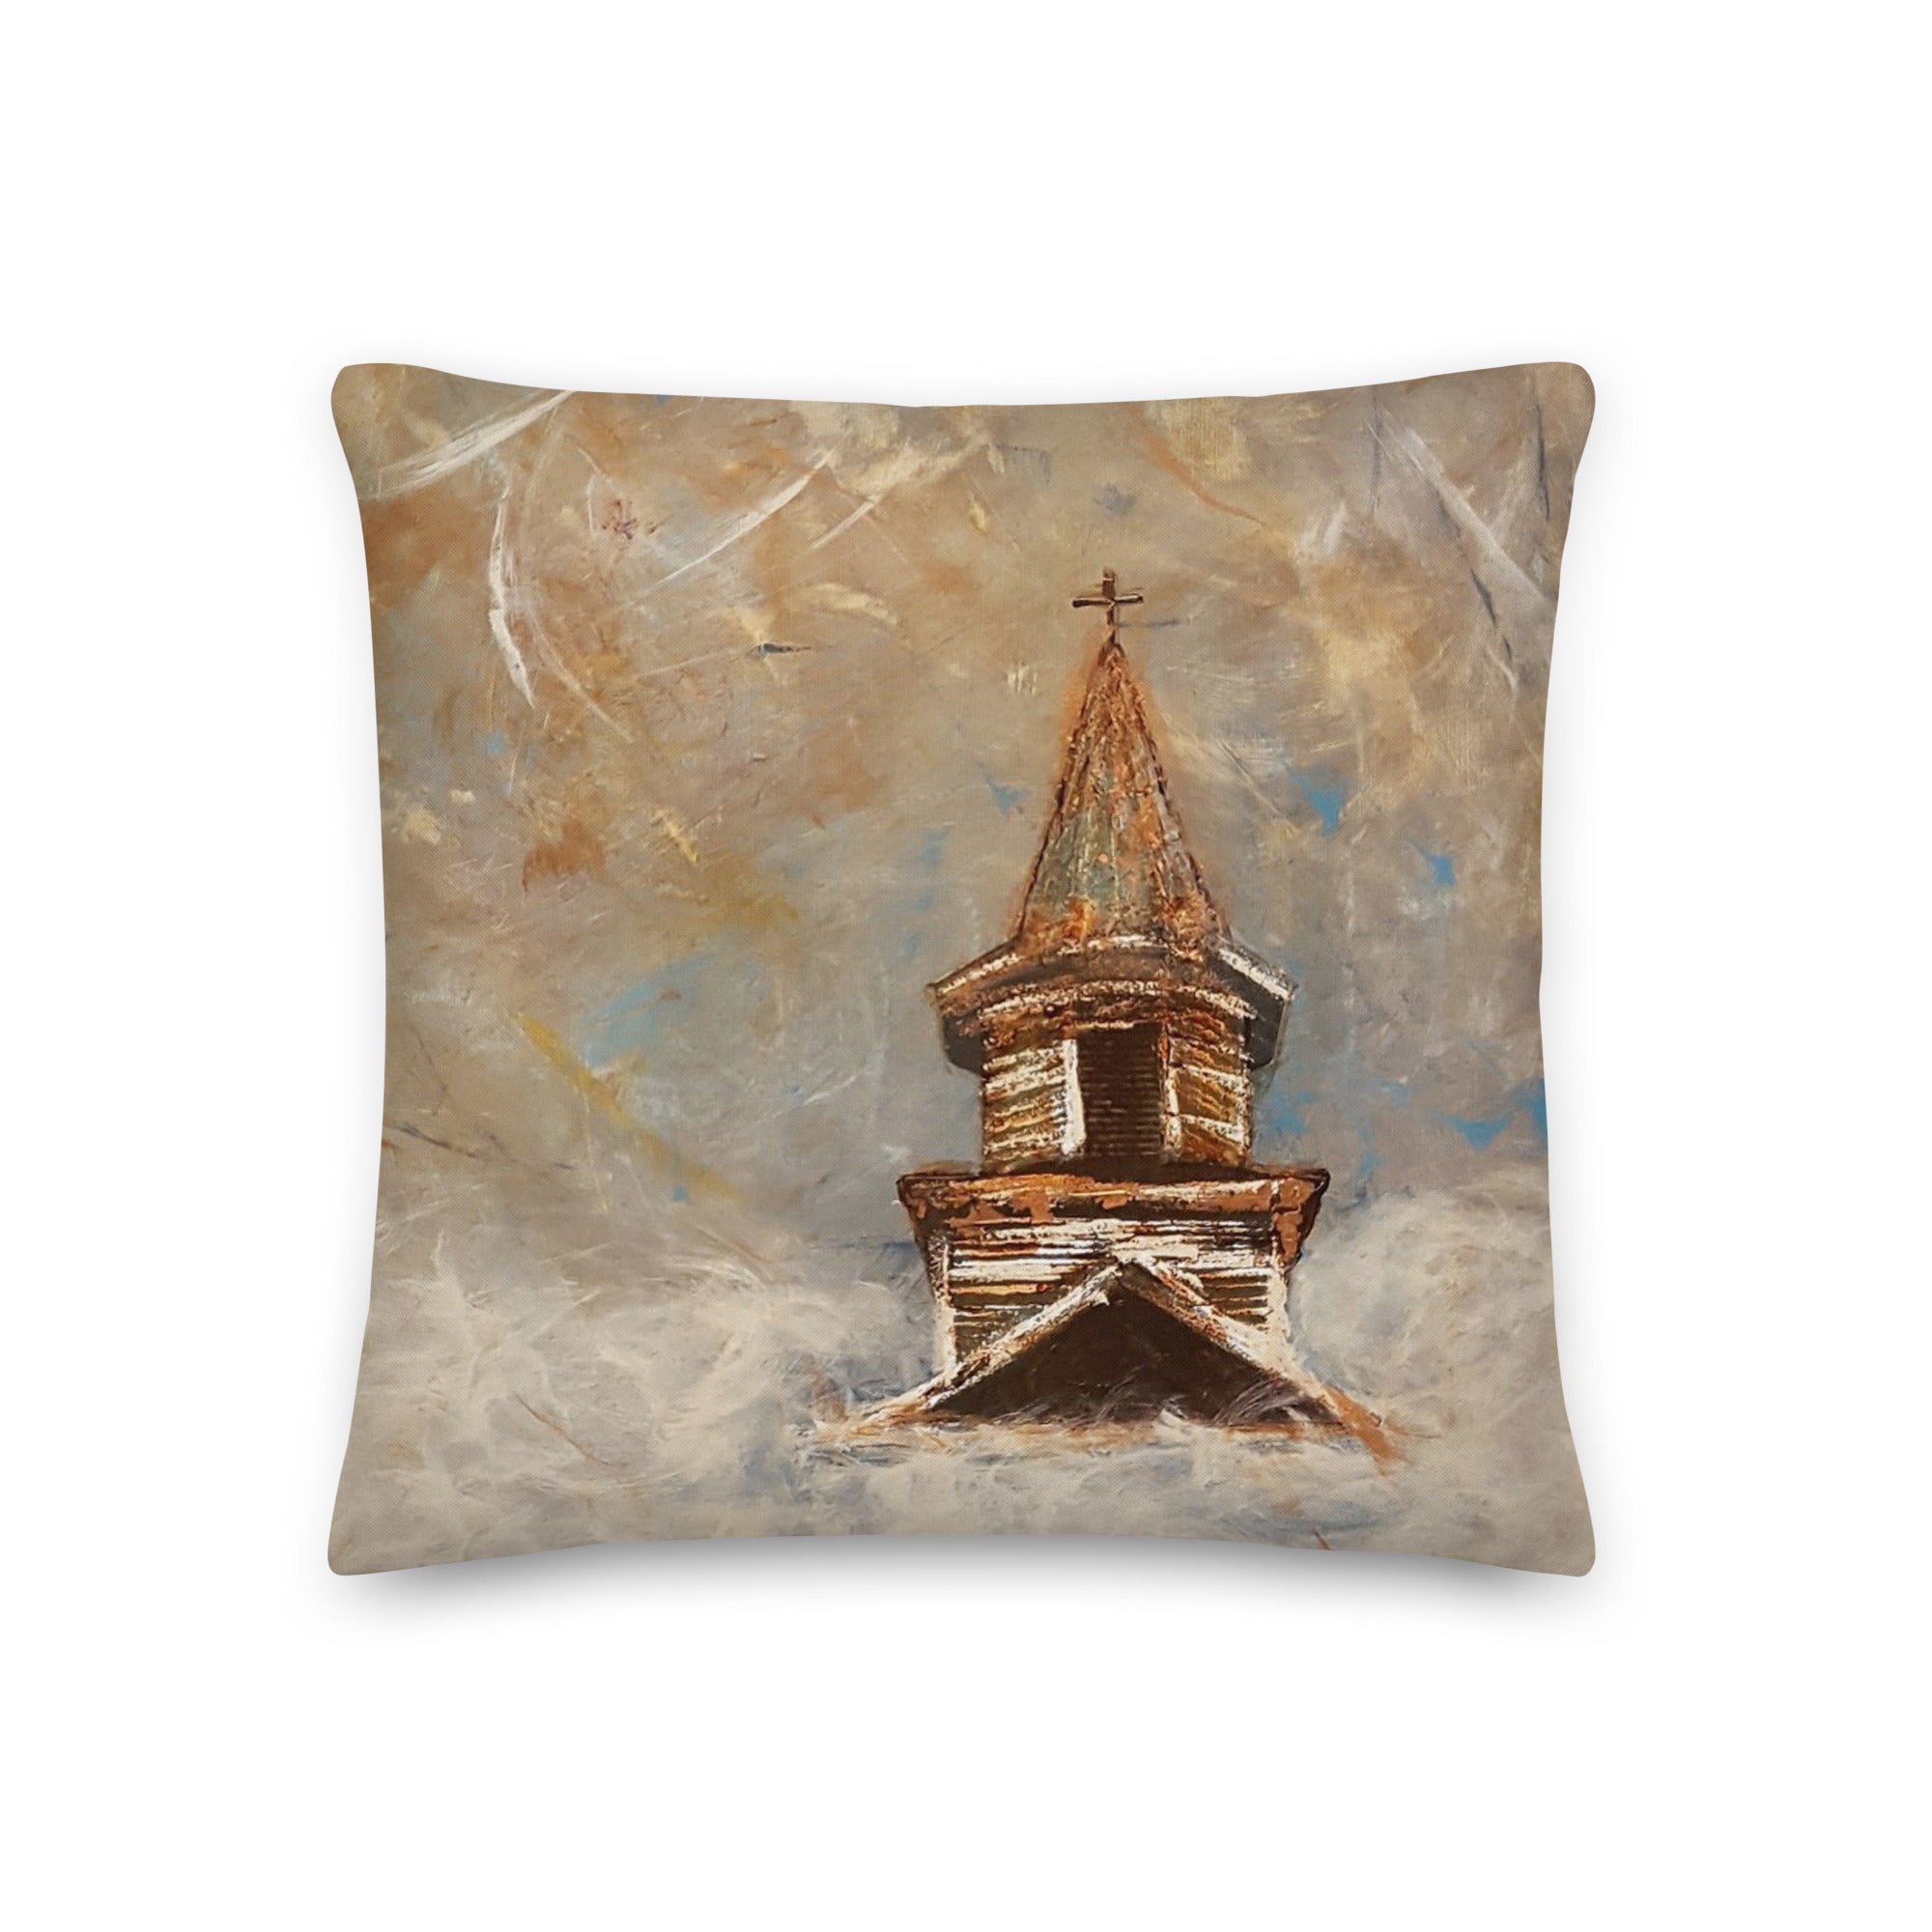 Steeple on the Horizon I - Artful, Decorative Throw Pillow with cloud and blue skies above country church steeple.  Original art on pillow.